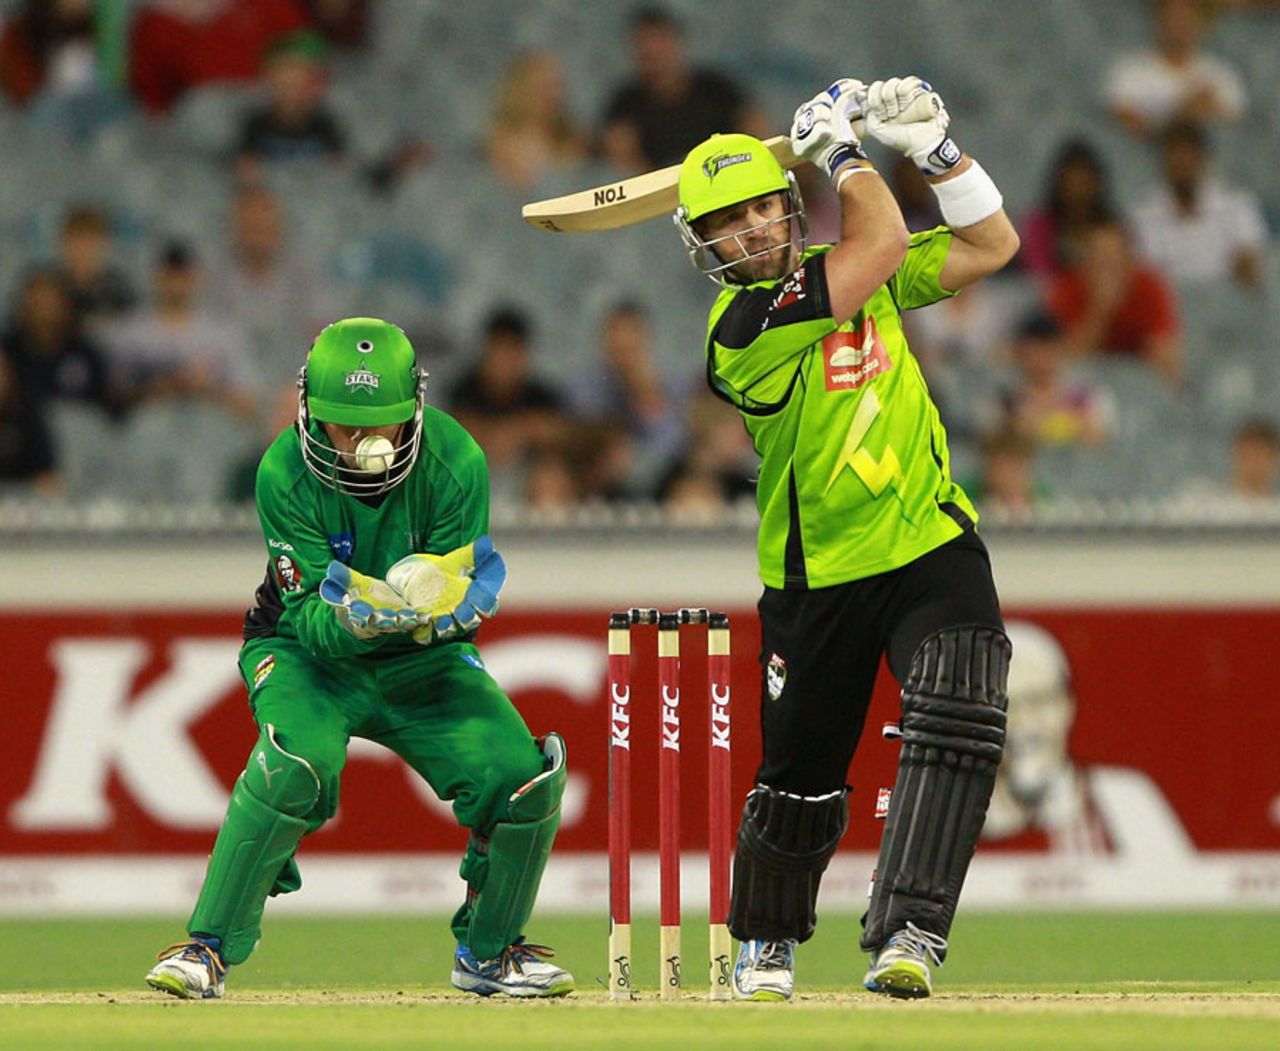 The ball lodges in Rob Quiney's helmet grill after Matt Prior's swing and miss, Melbourne Stars v Sydney Thunder, Big Bash League, January 8, 2013